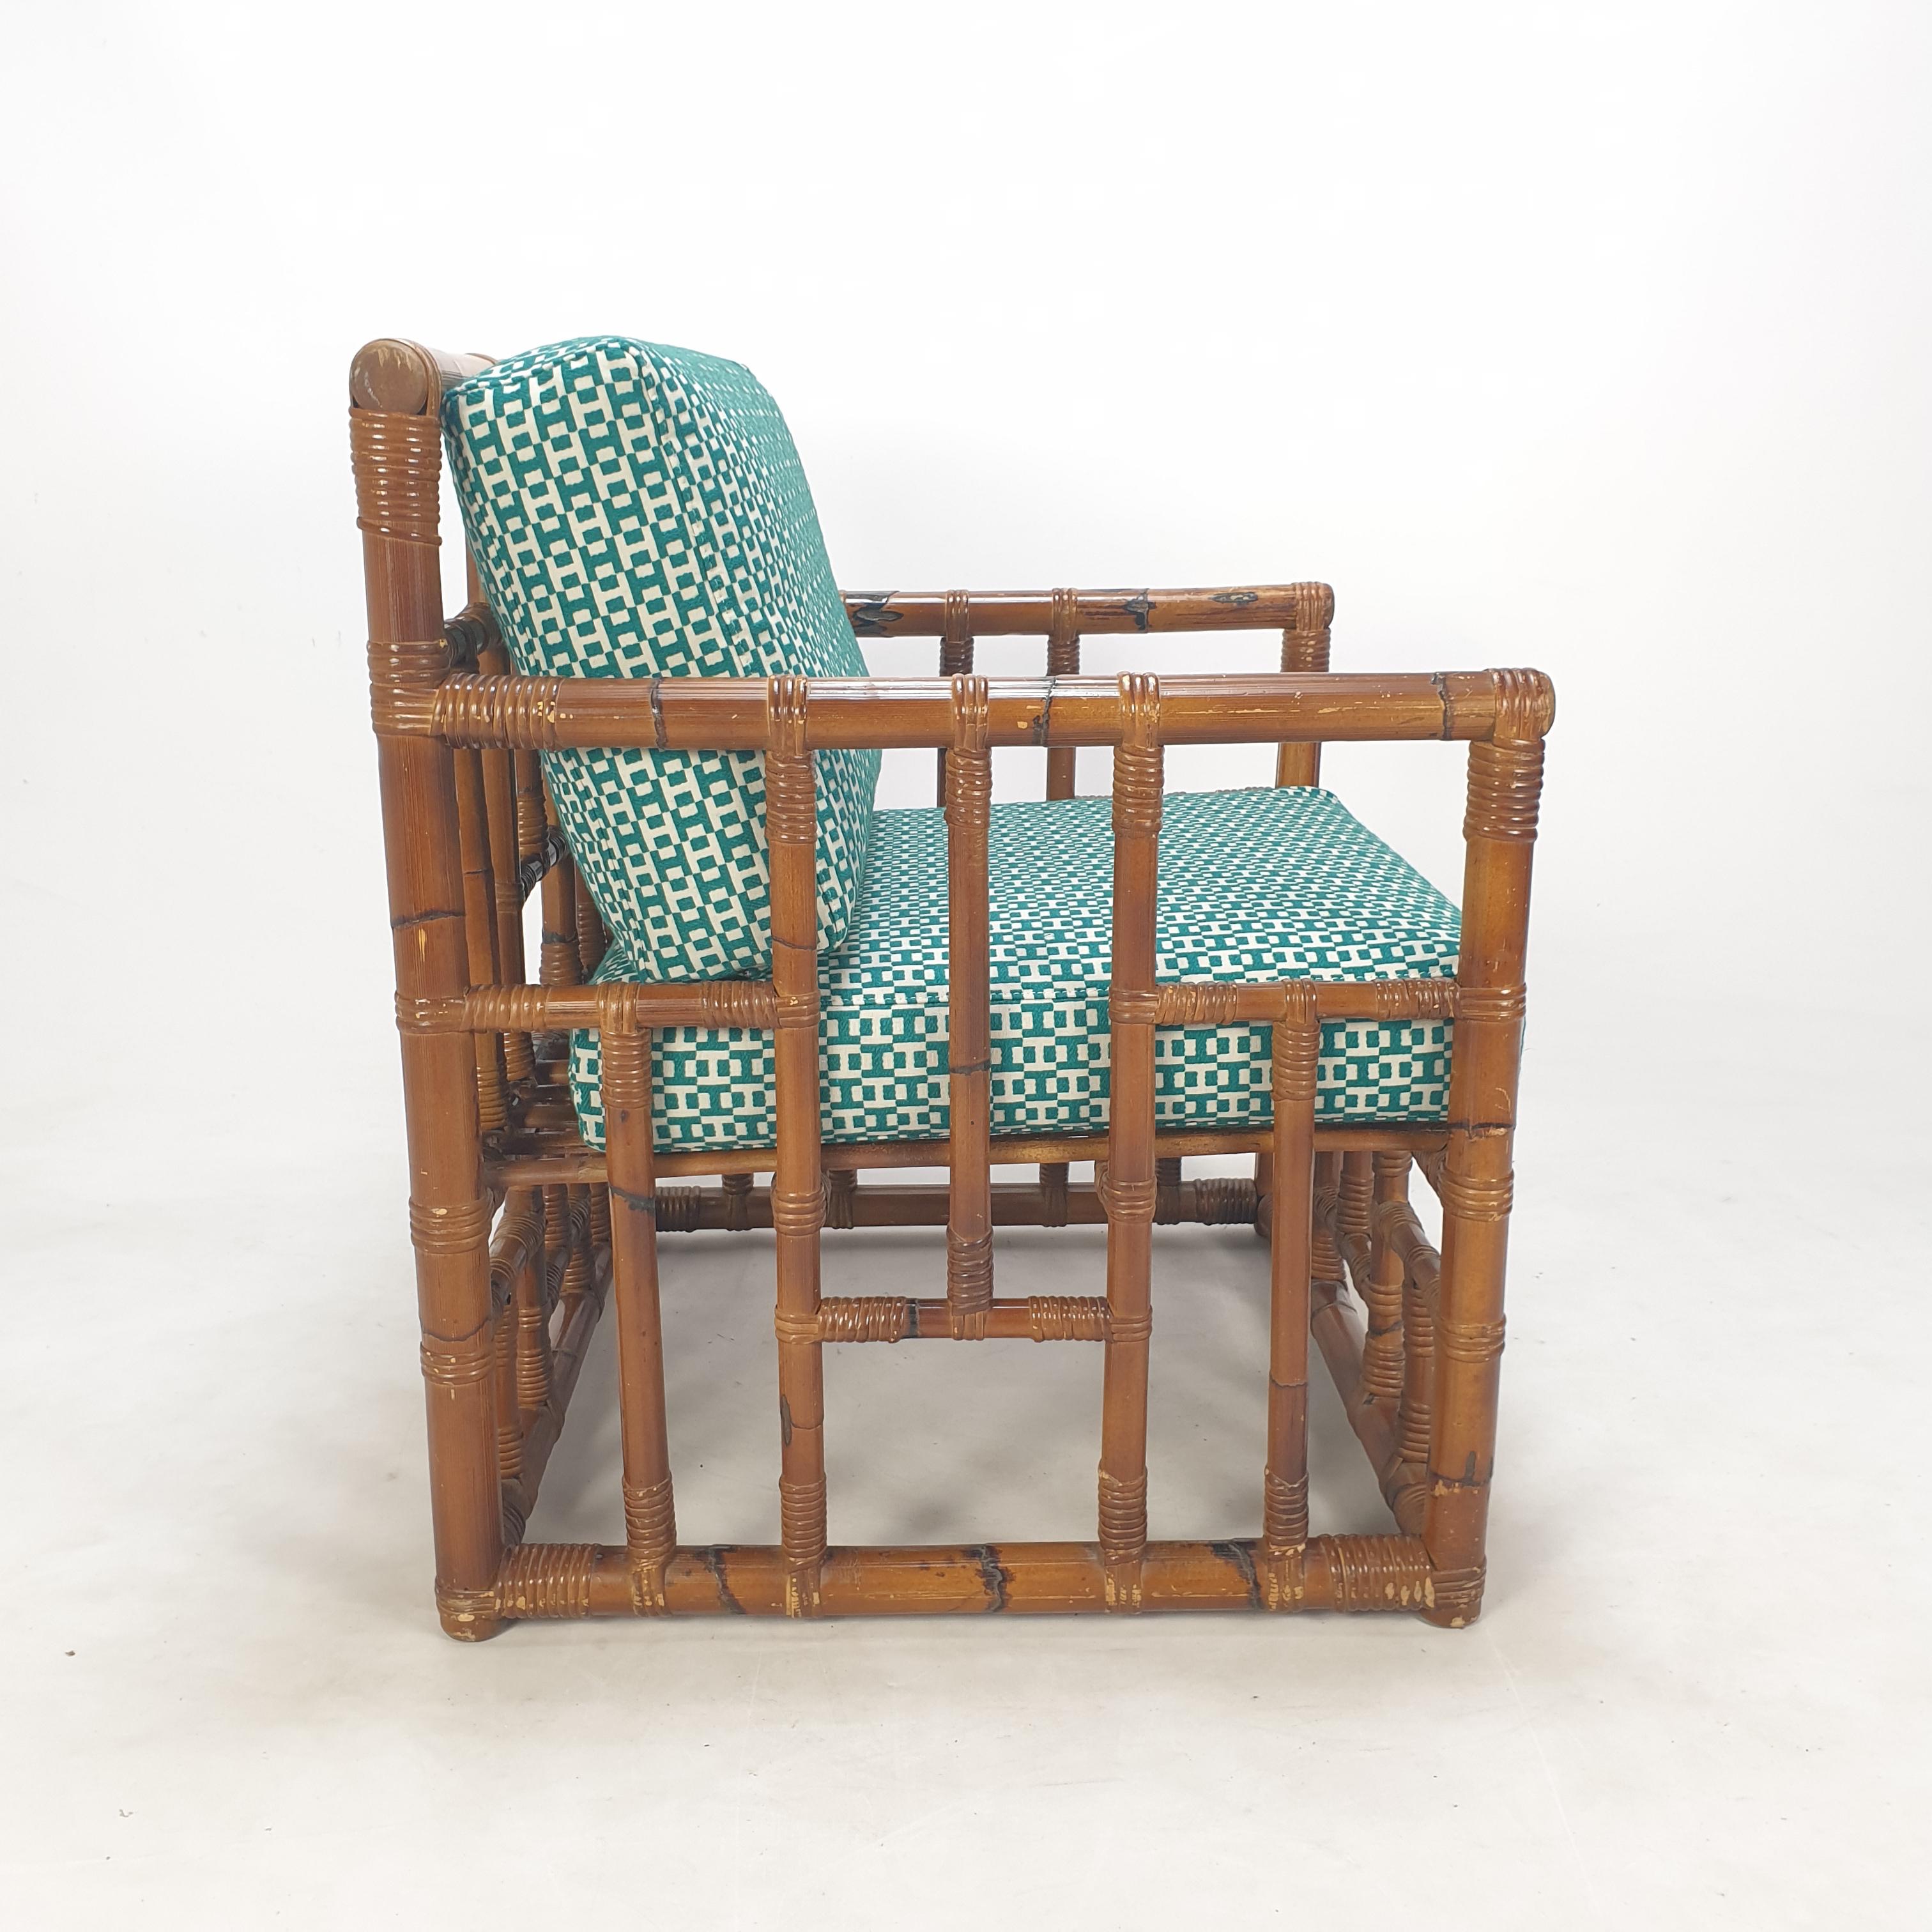 Pair of Italian Bamboo Lounge Chairs with Hermès Upholstery, 1970's For Sale 11